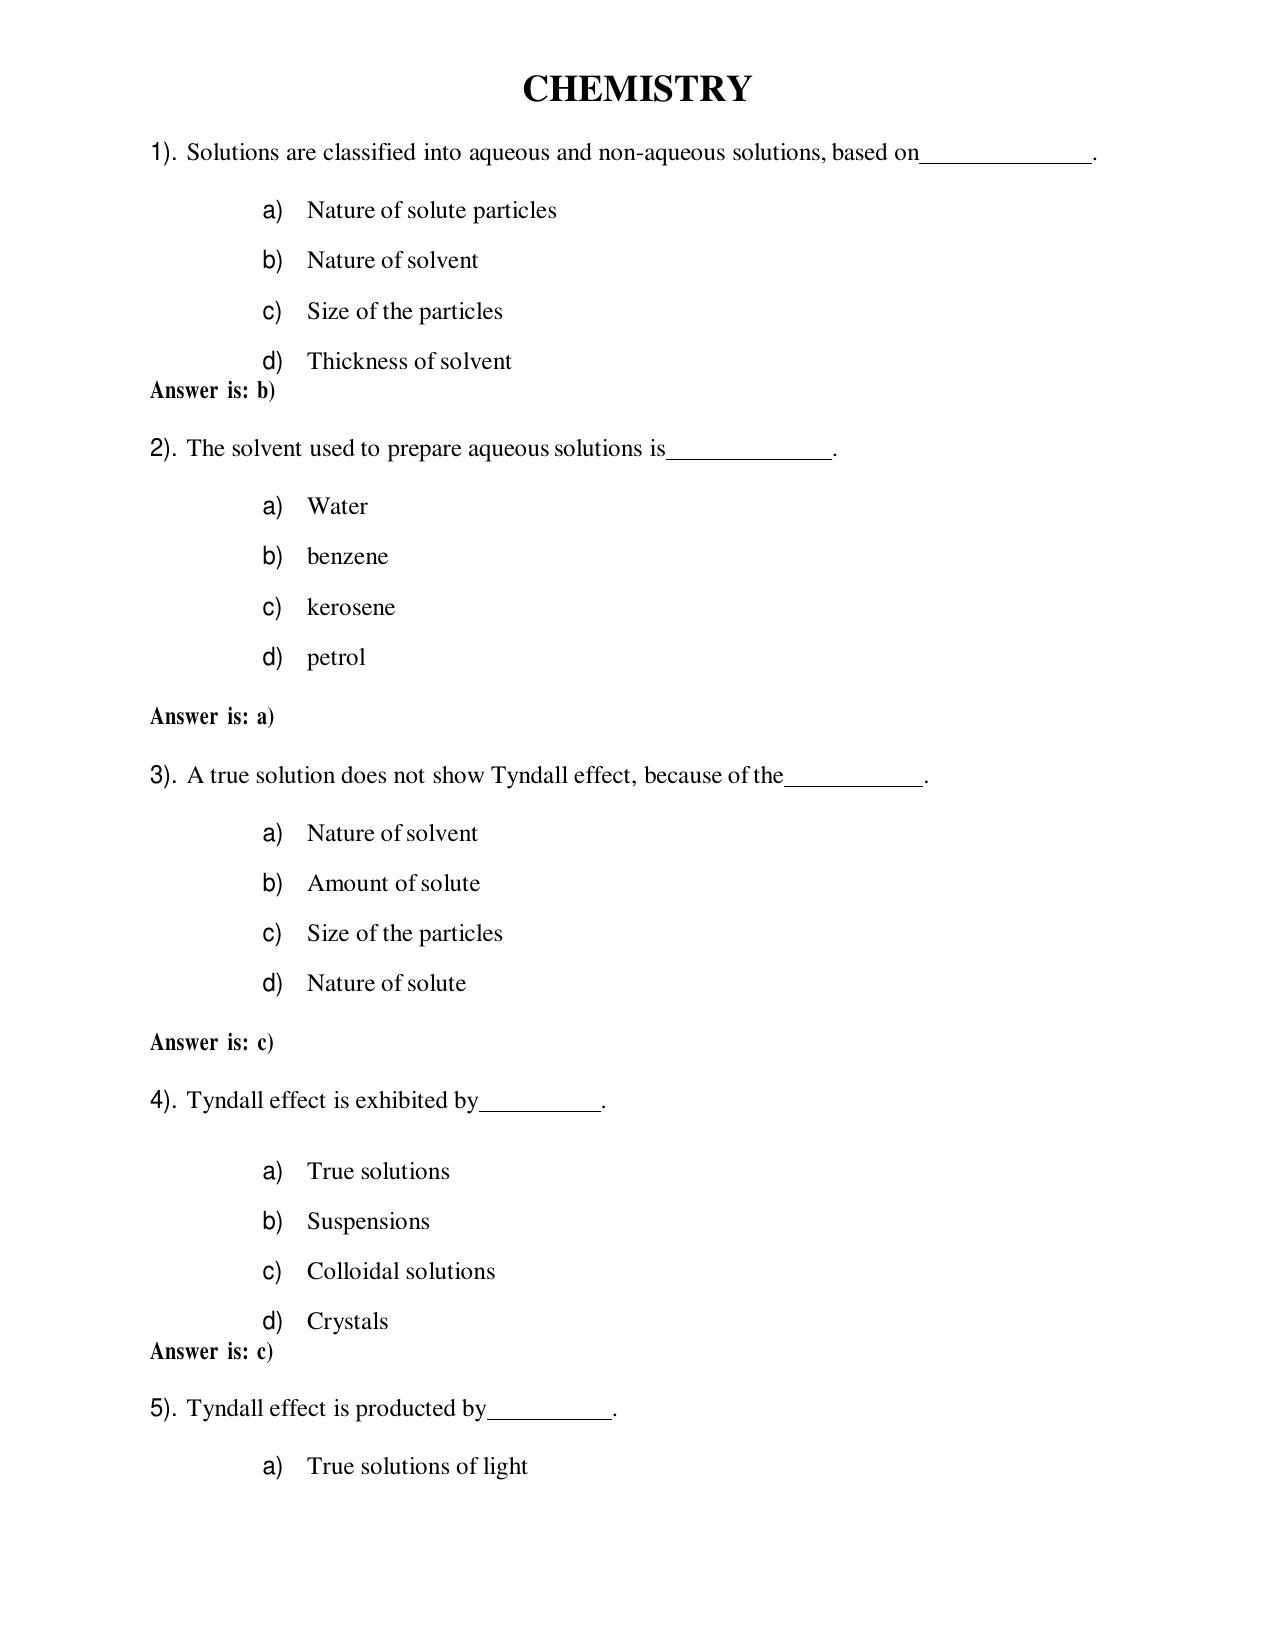 OUAT Chemistry Sample Paper - Page 1